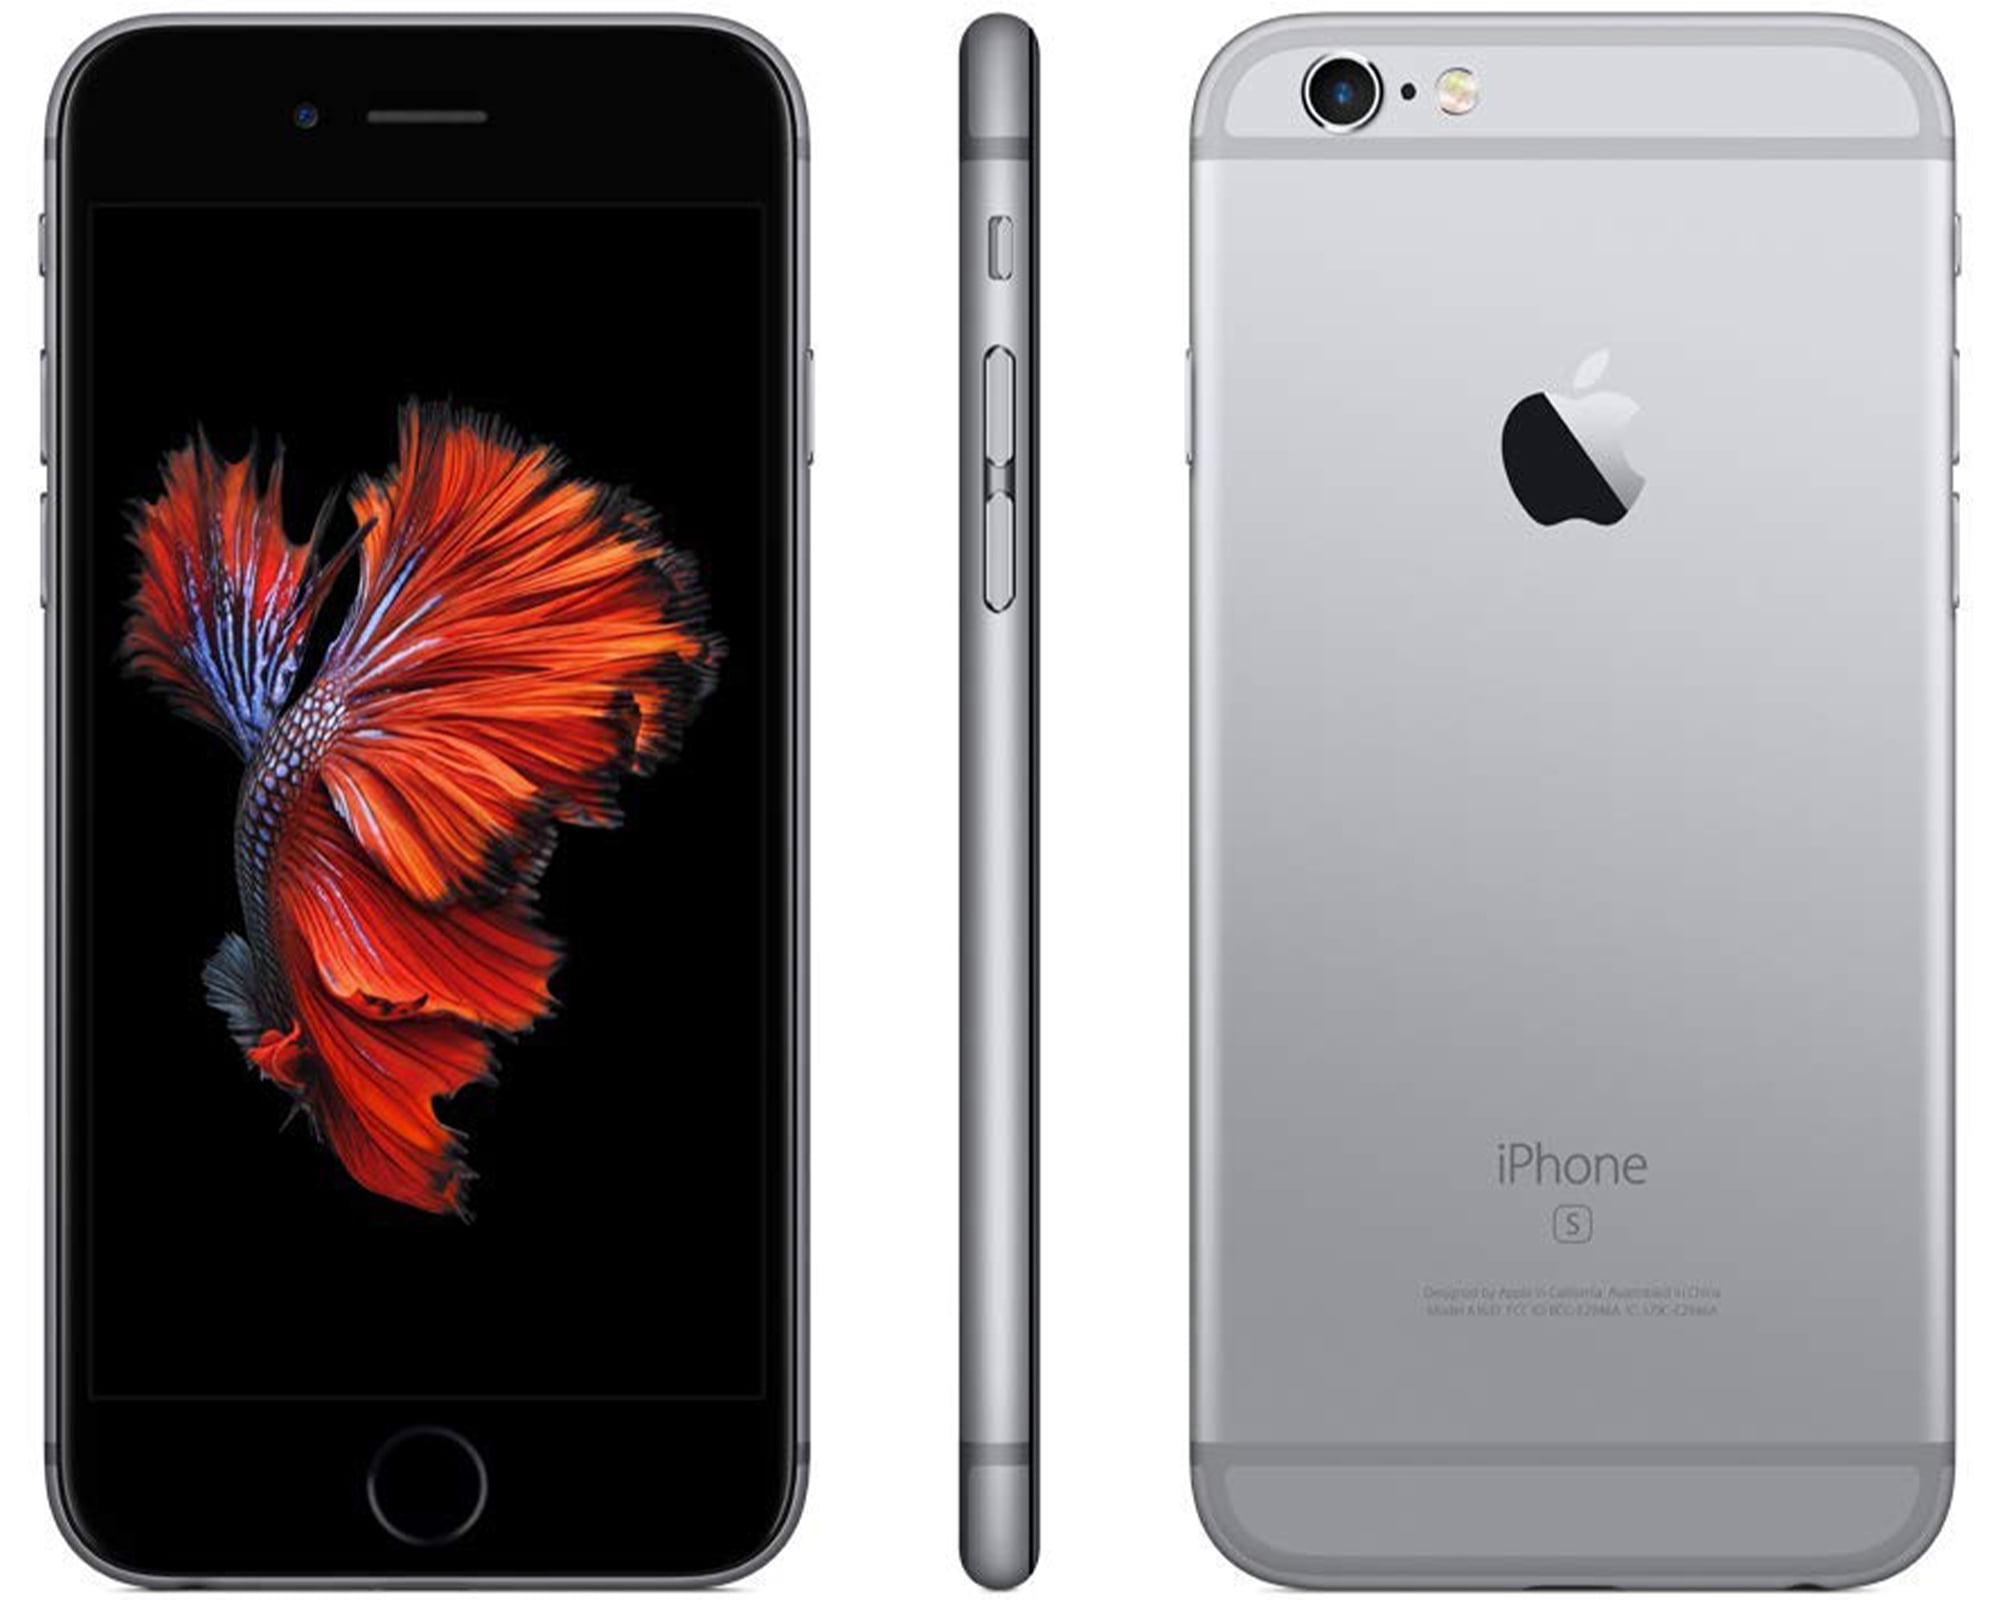 Apple Stores will send some iPhone 6/6s phones for off-site repairs,  offering 16GB loaners - 9to5Mac